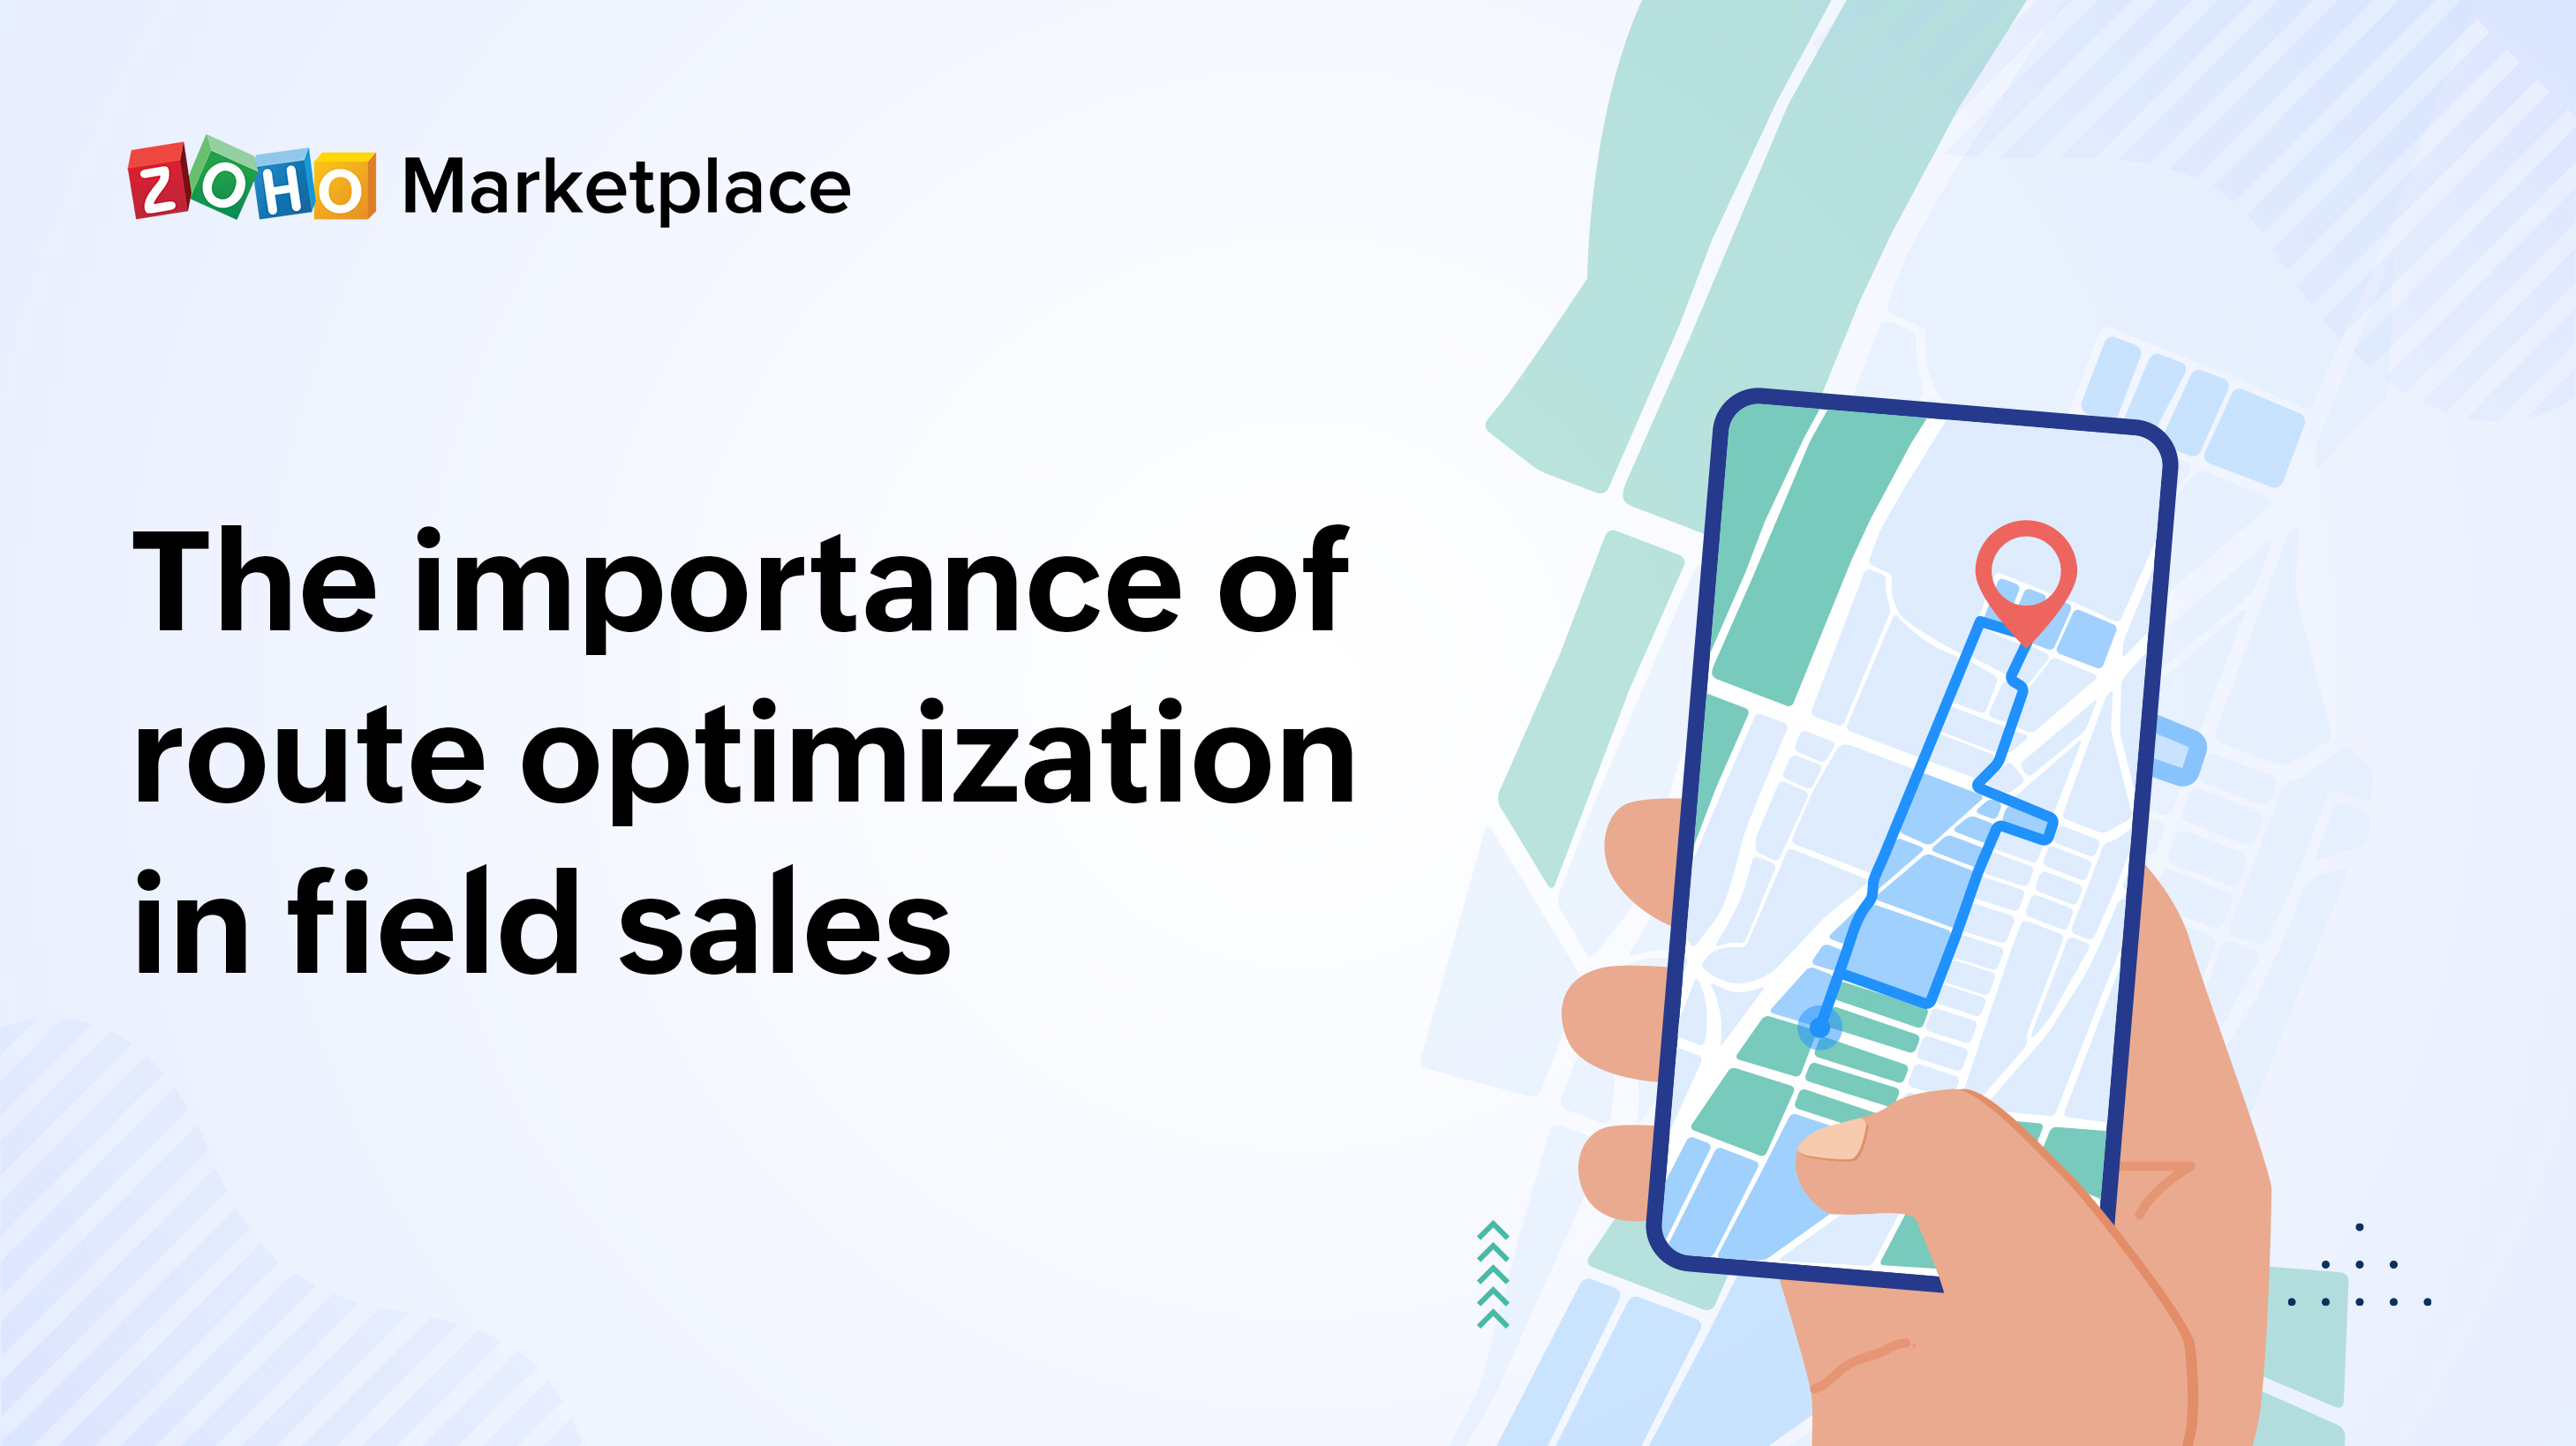 The importance of route optimization in field sales